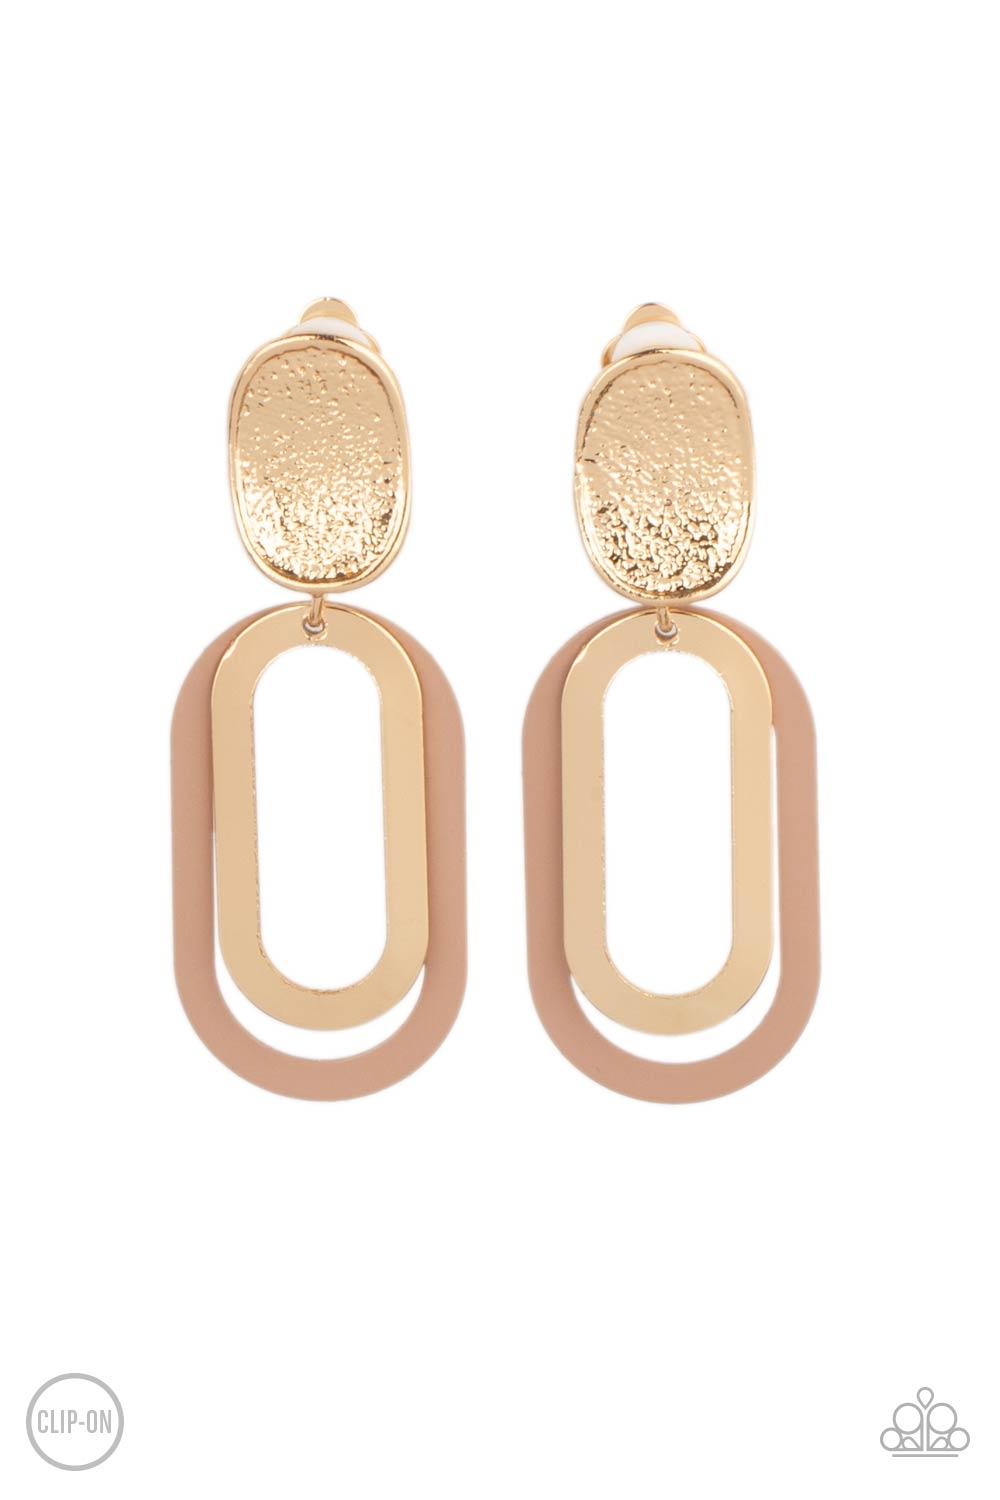 Paparazzi Accessories Melrose Mystery - Brown *Clip-On Shiny gold and Iced Coffee oblong hoops dangle one in front of the other from a shimmery textured gold oval disc for an upscale finale. Earring attaches to a standard clip-on fitting. Sold as one pair